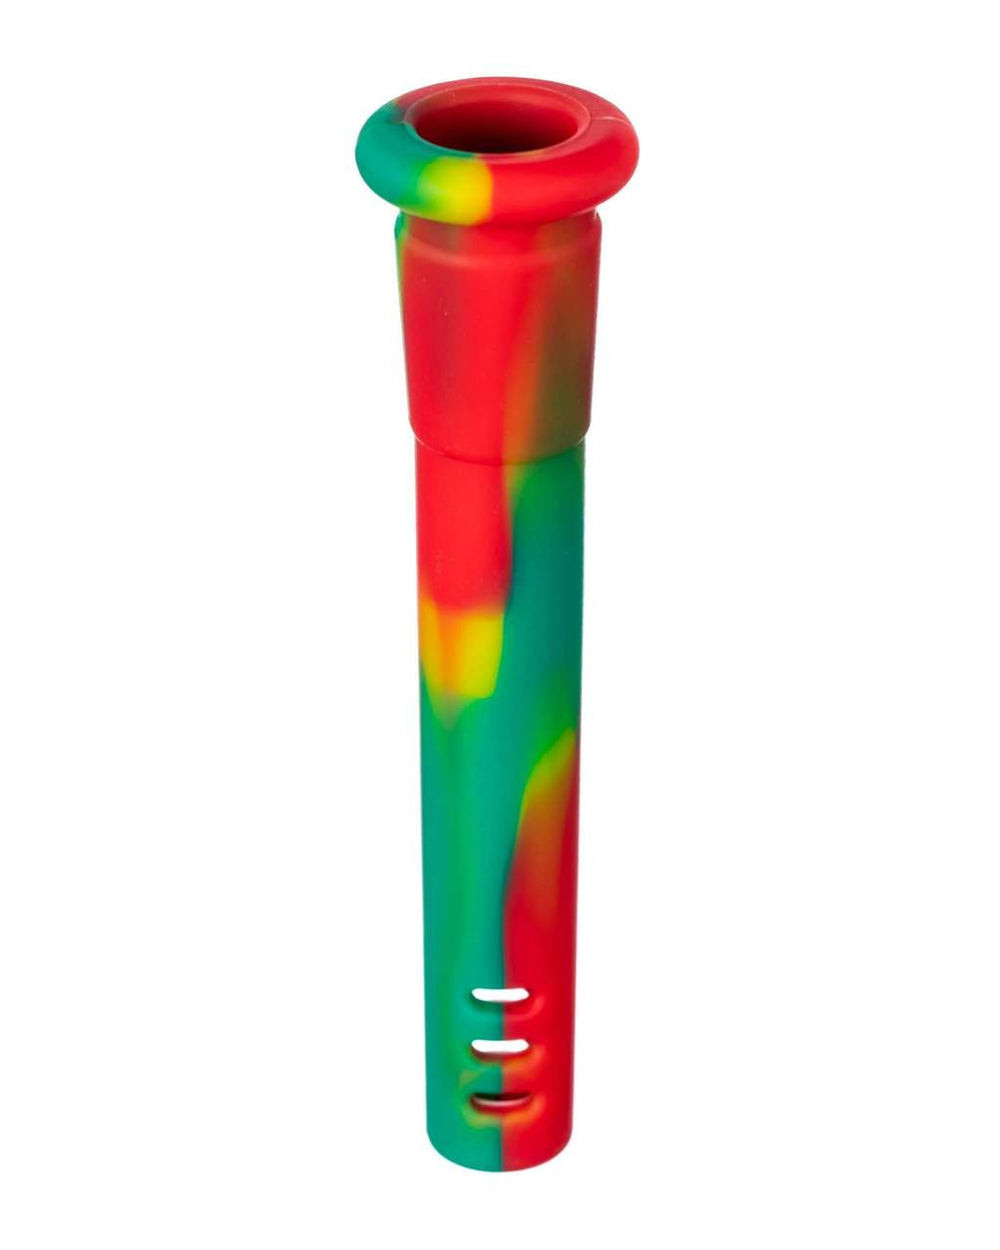 downstem and bowl 18mm to 14mm Silicone Downstem